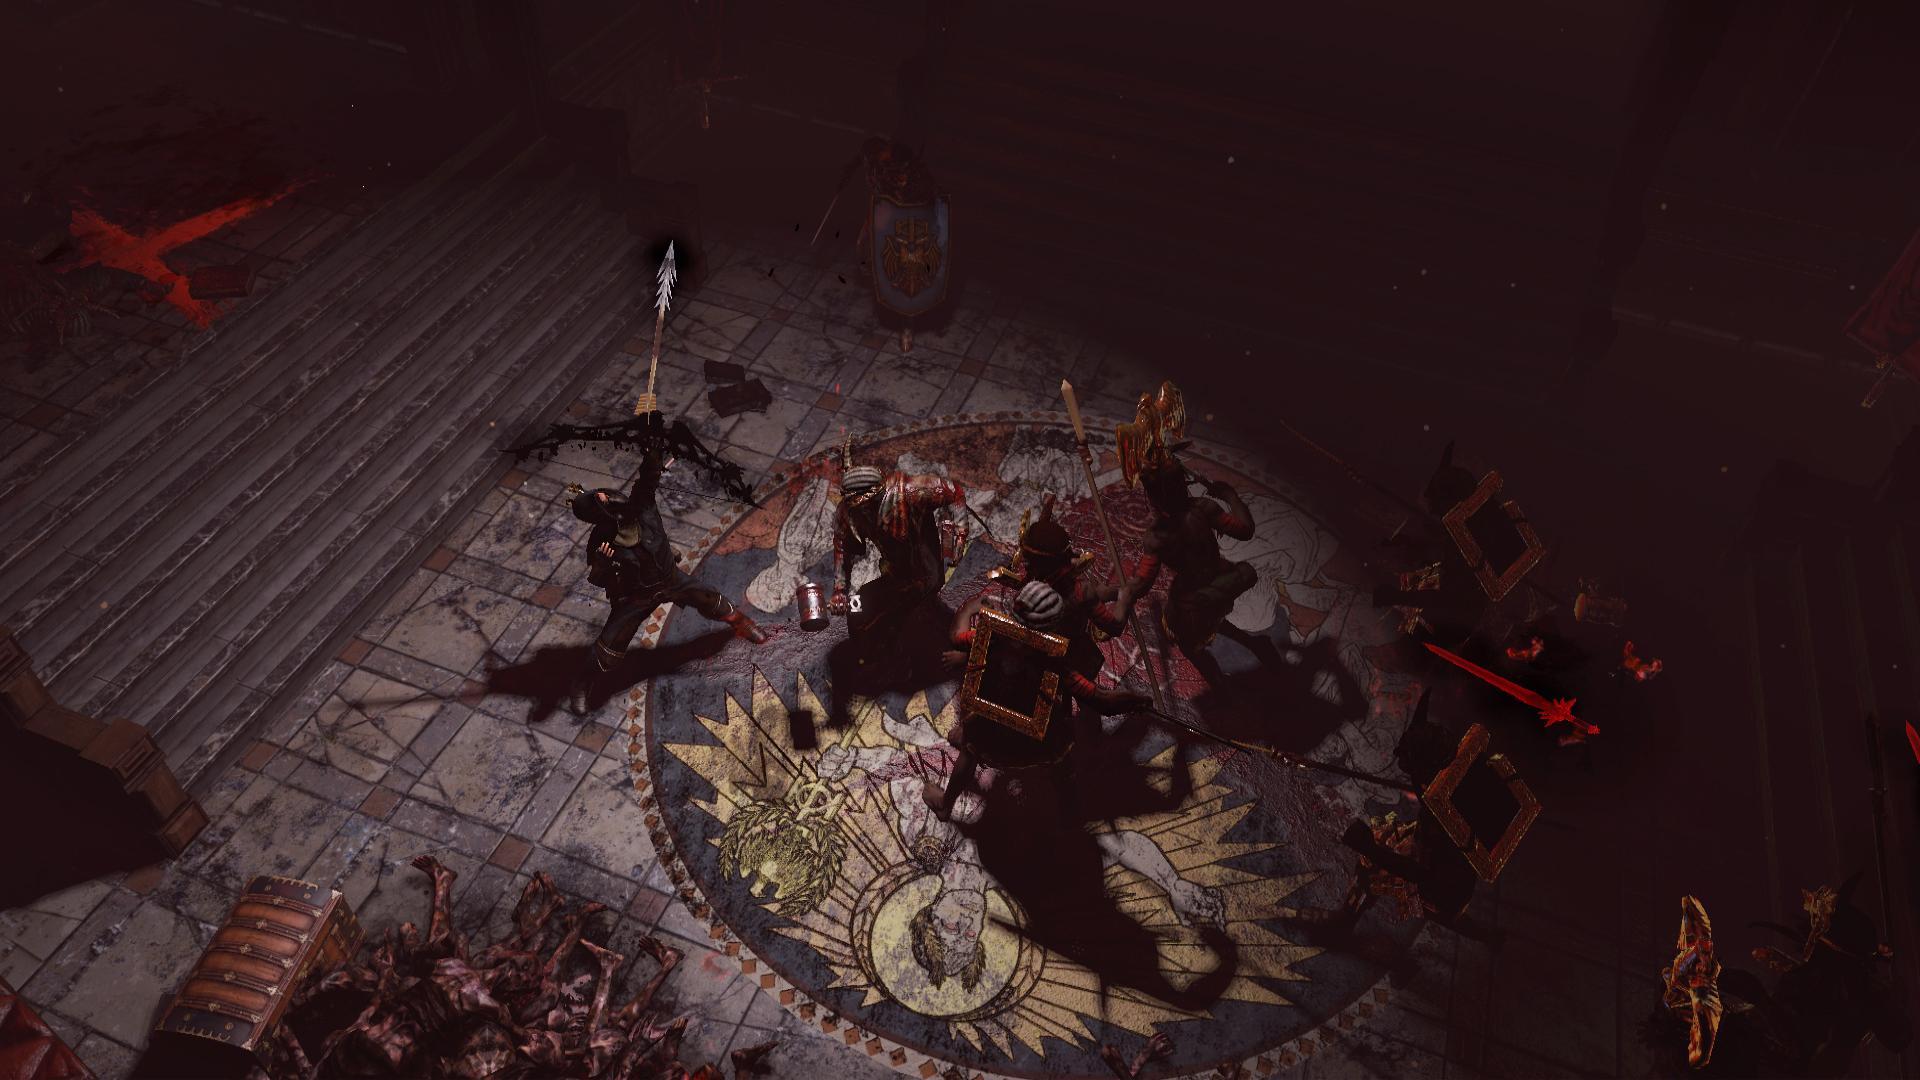 Screenshot №48 from game Path of Exile